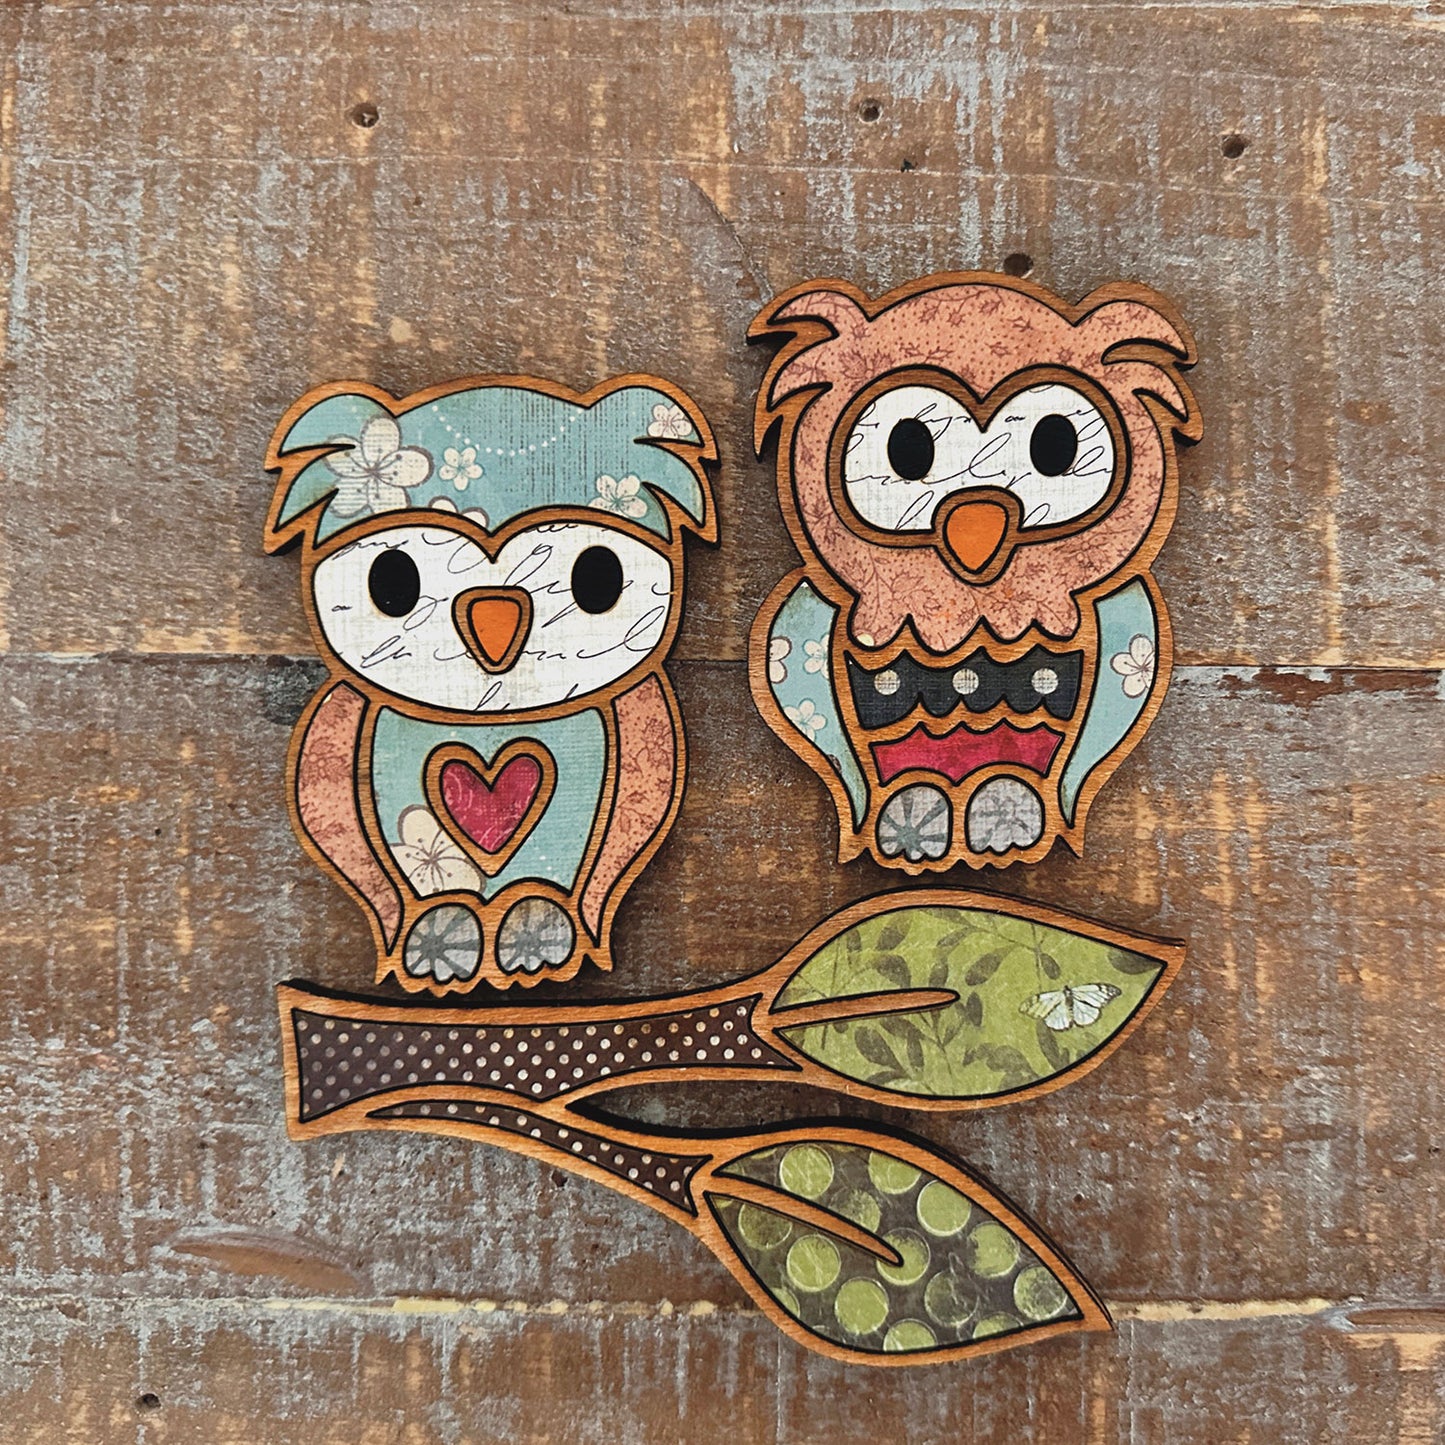 Whimsical Owl Magnet Collection (Set of 3)